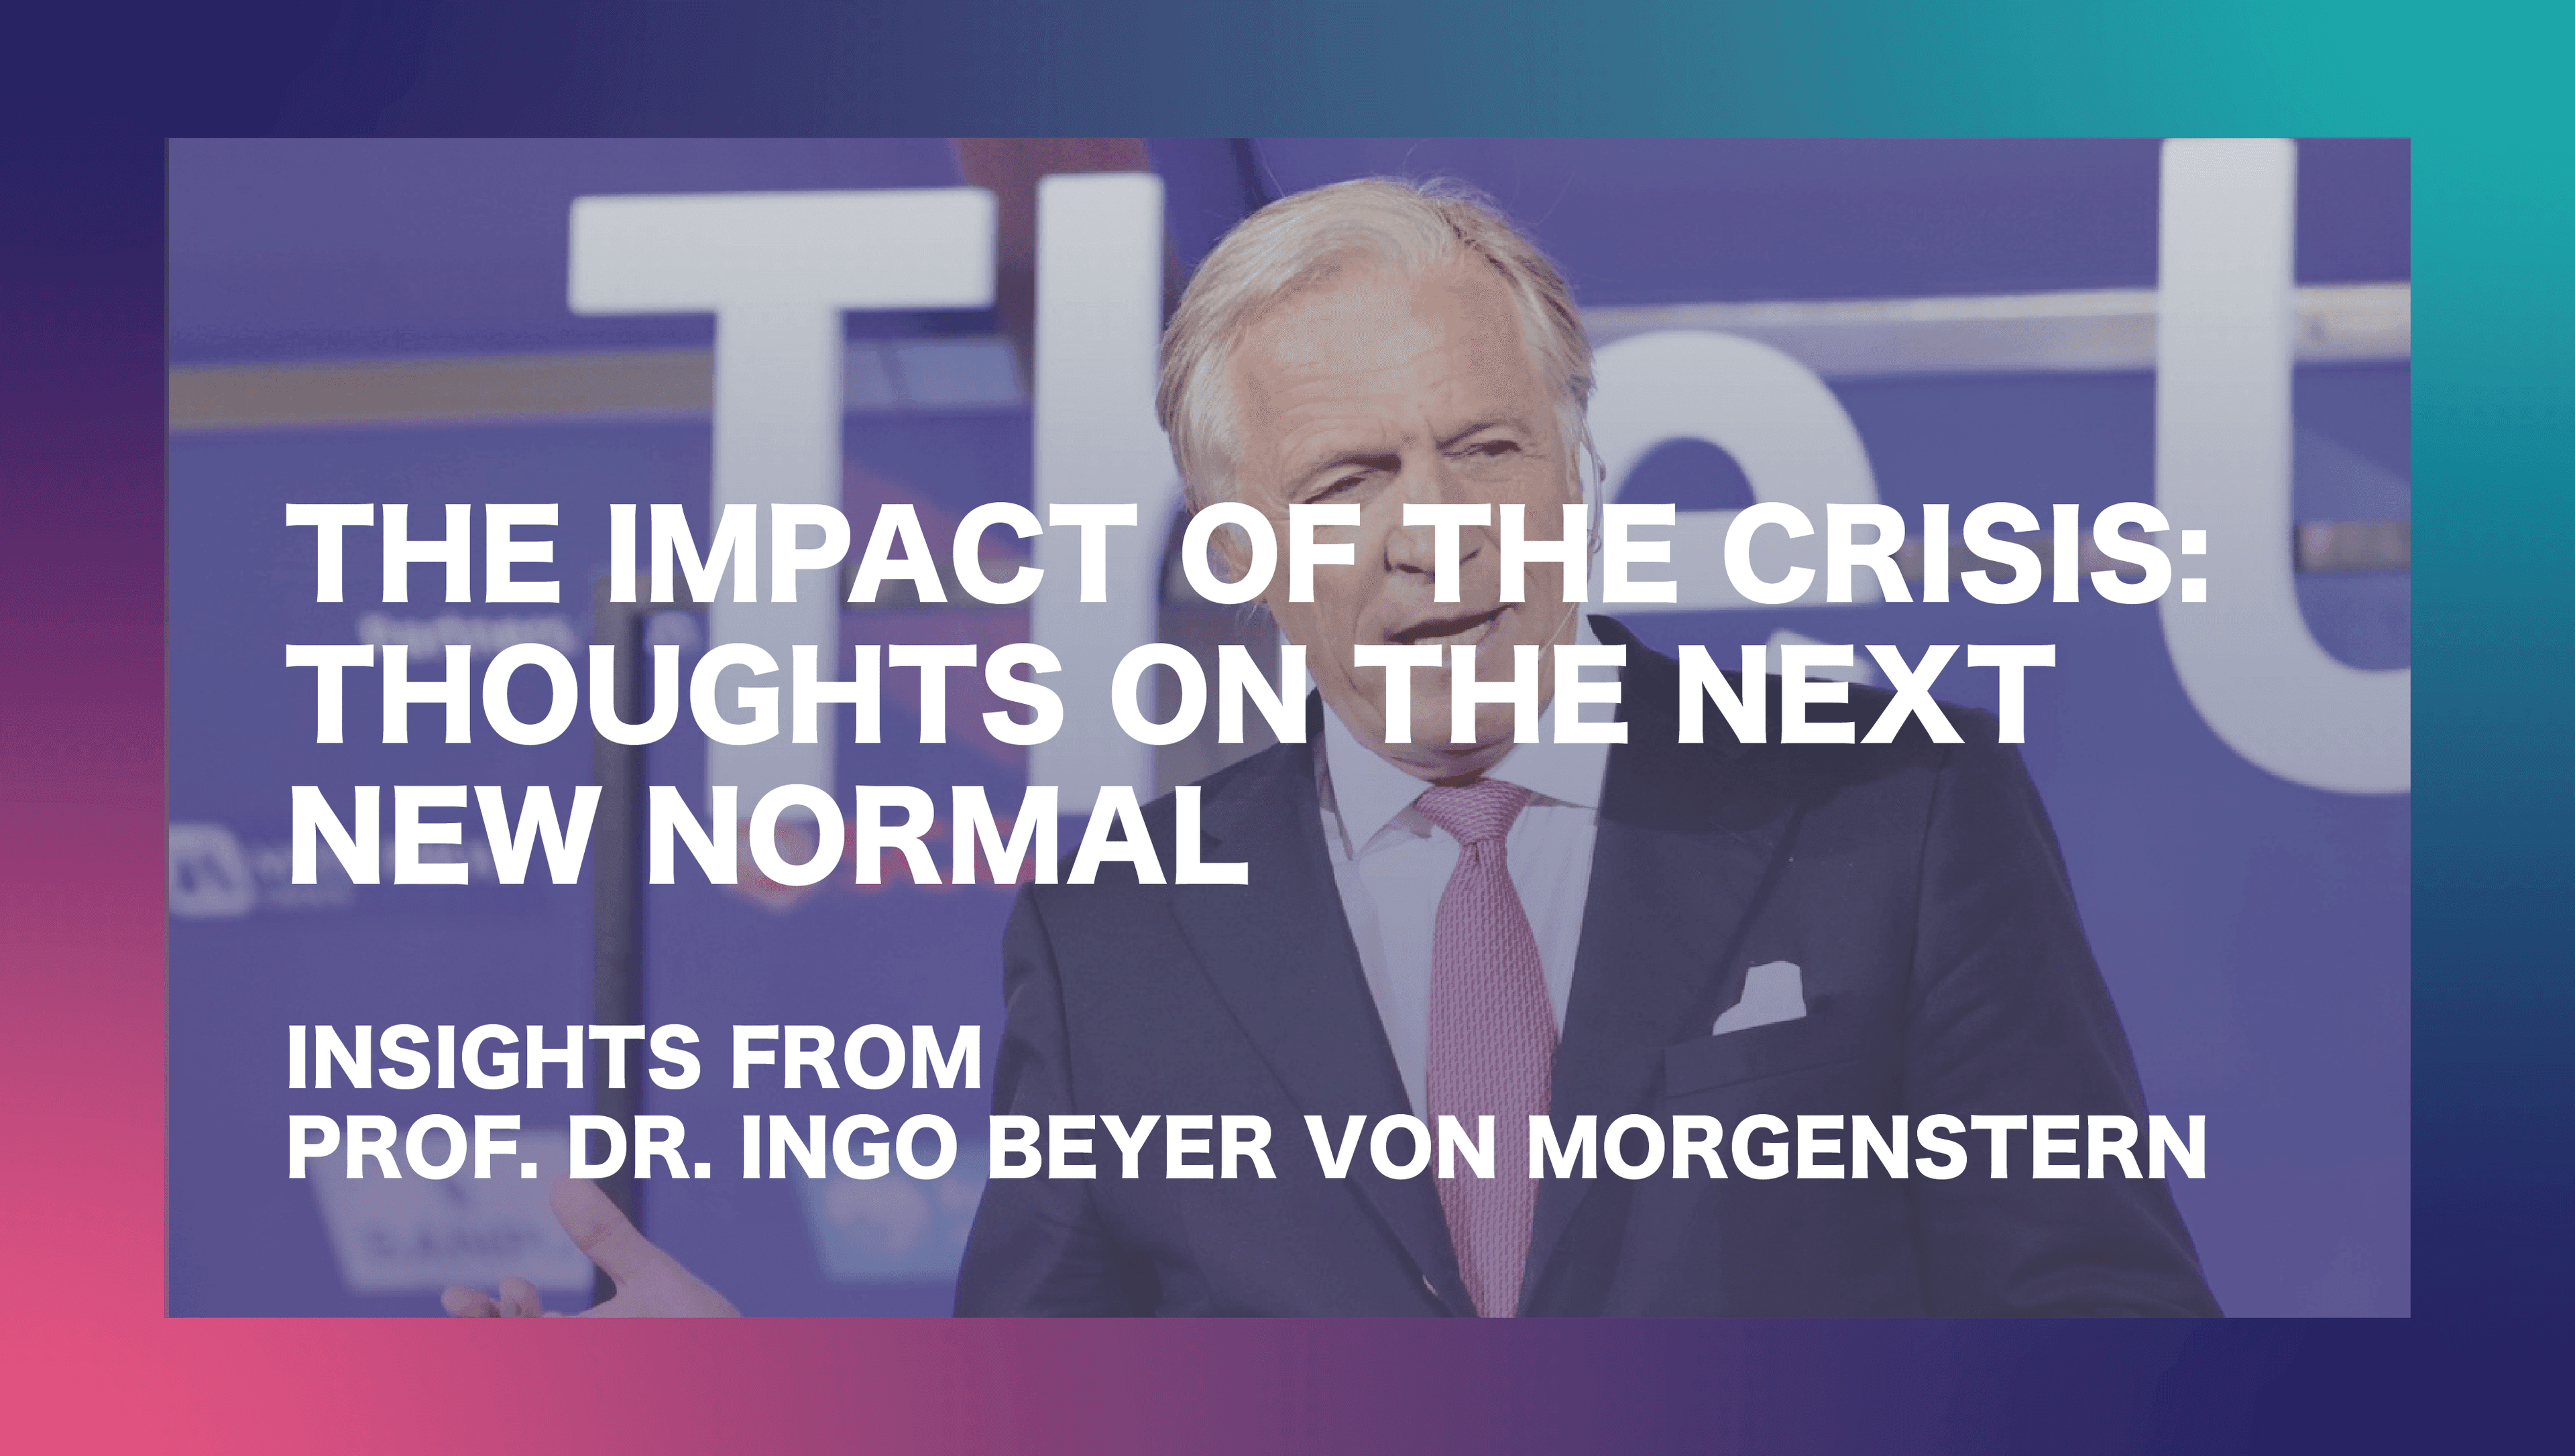 The impact of the crisis thoughts on the next new normal